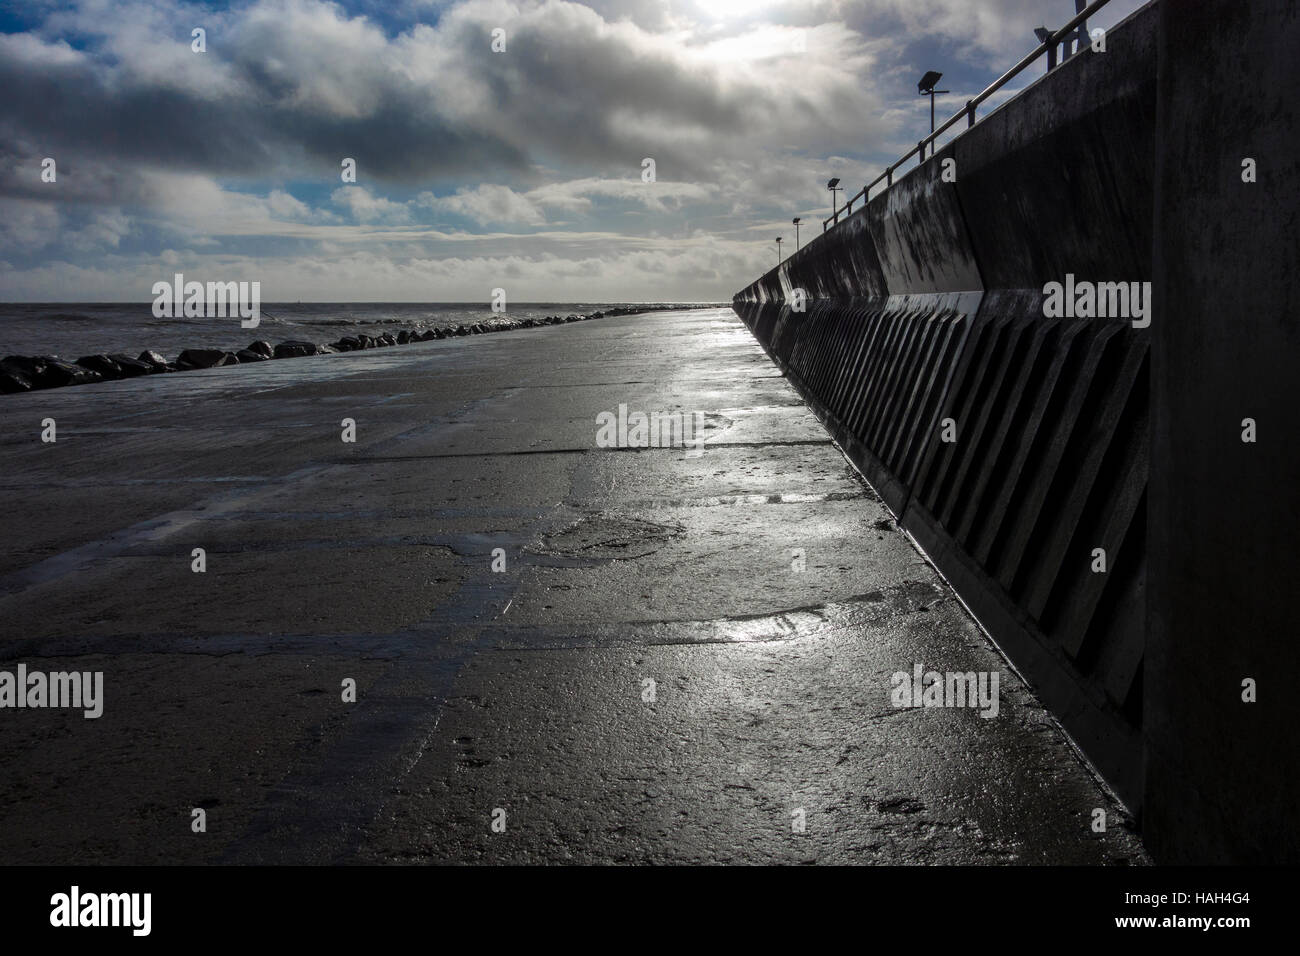 Sea wall at Lowestoft on a stormy day. Stock Photo